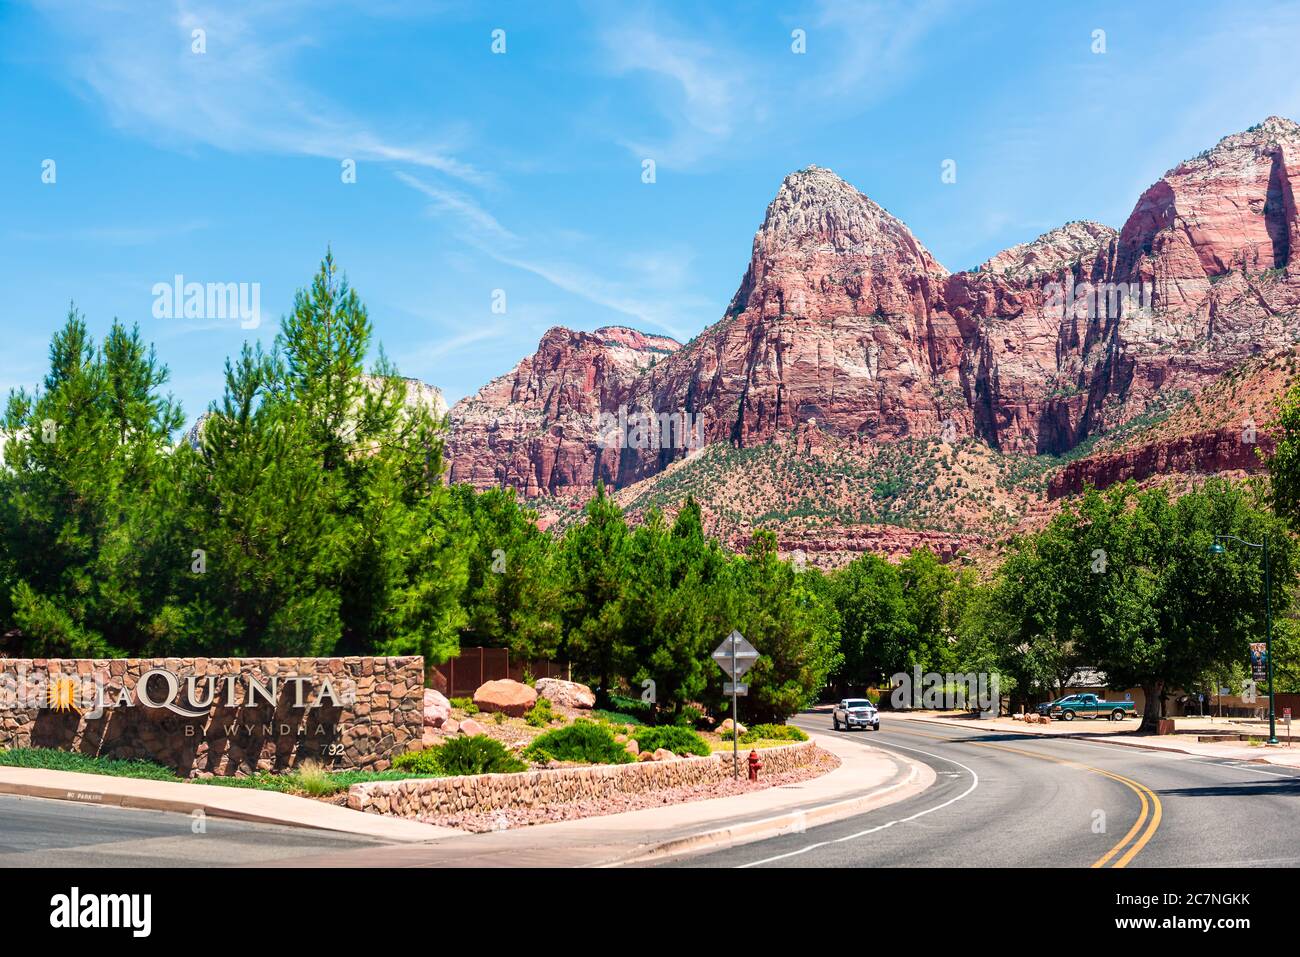 Springdale, USA - August 5, 2019: Zion National Park road street in Utah and town city sign for expensive La Quinta hotel lodging accommodation Stock Photo